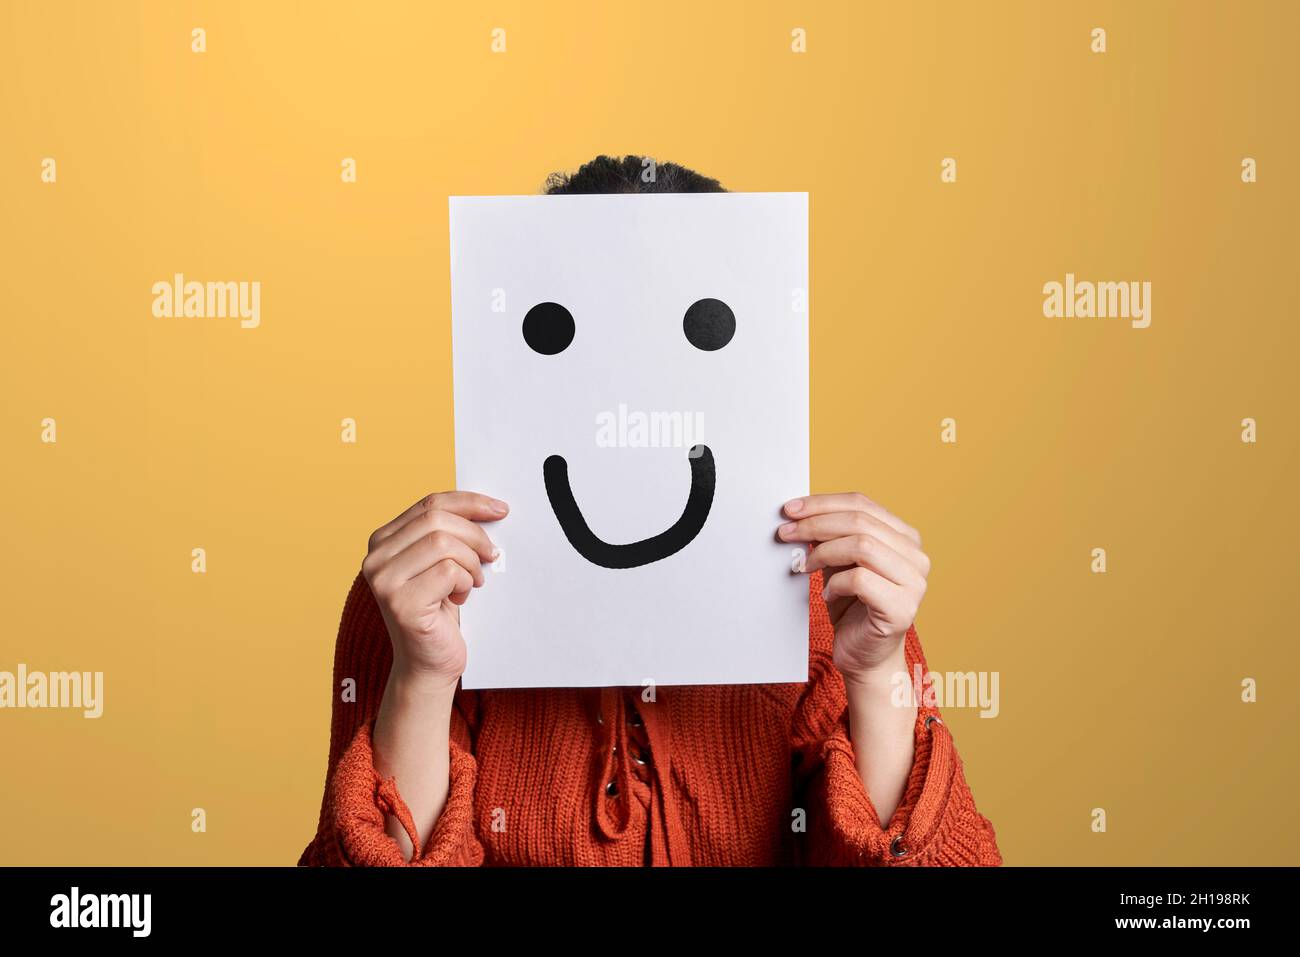 Woman holds a paper with drawn fake smile. Woman hiding her feelings and expressions, covering face with paper and fake good mood smile Stock Photo